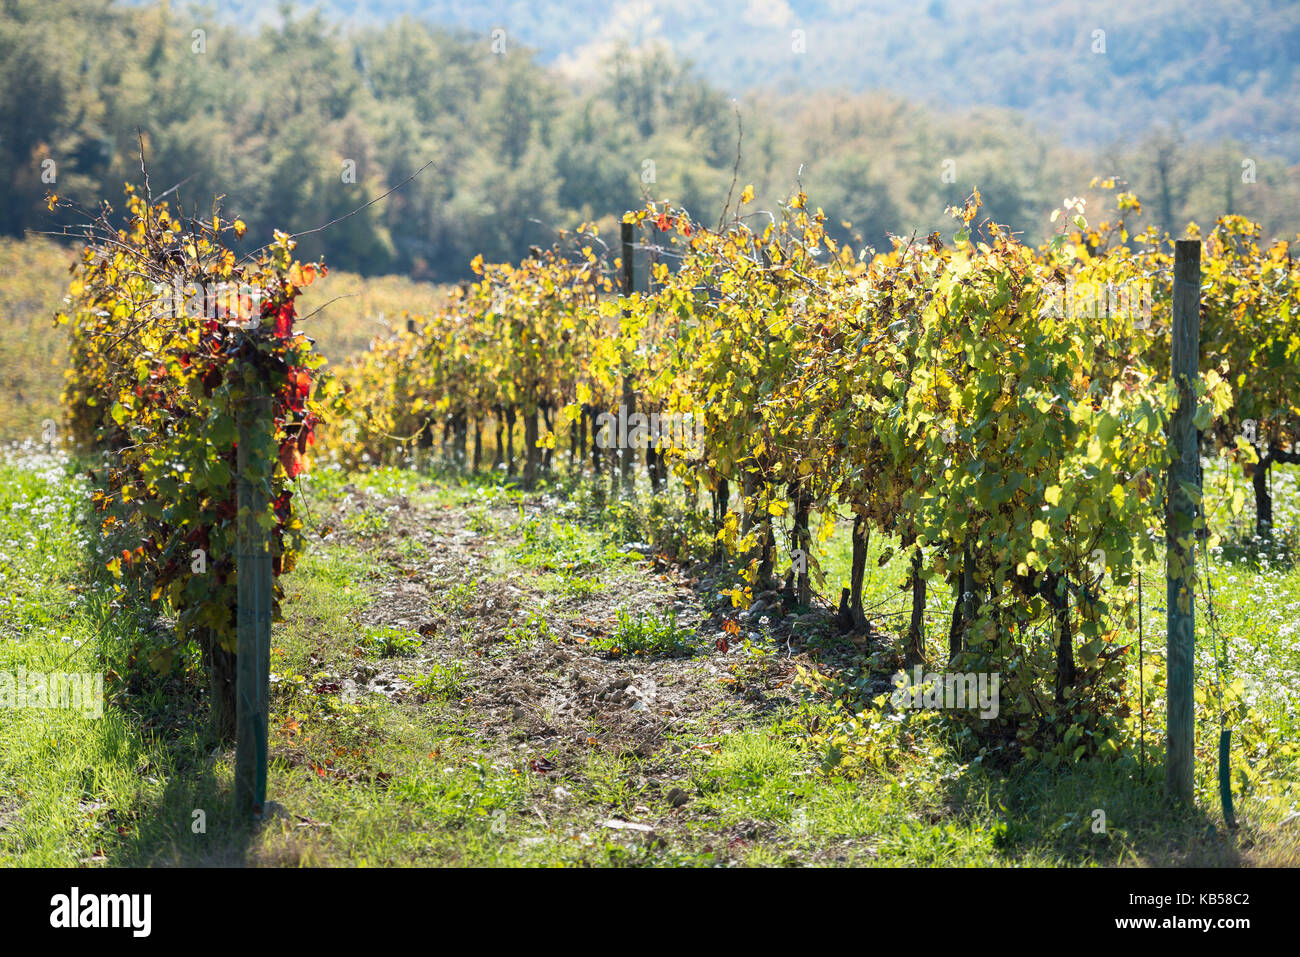 Shallow focus close view of green, yellow and red autumn leaves of Tuscany vineyard rows Stock Photo